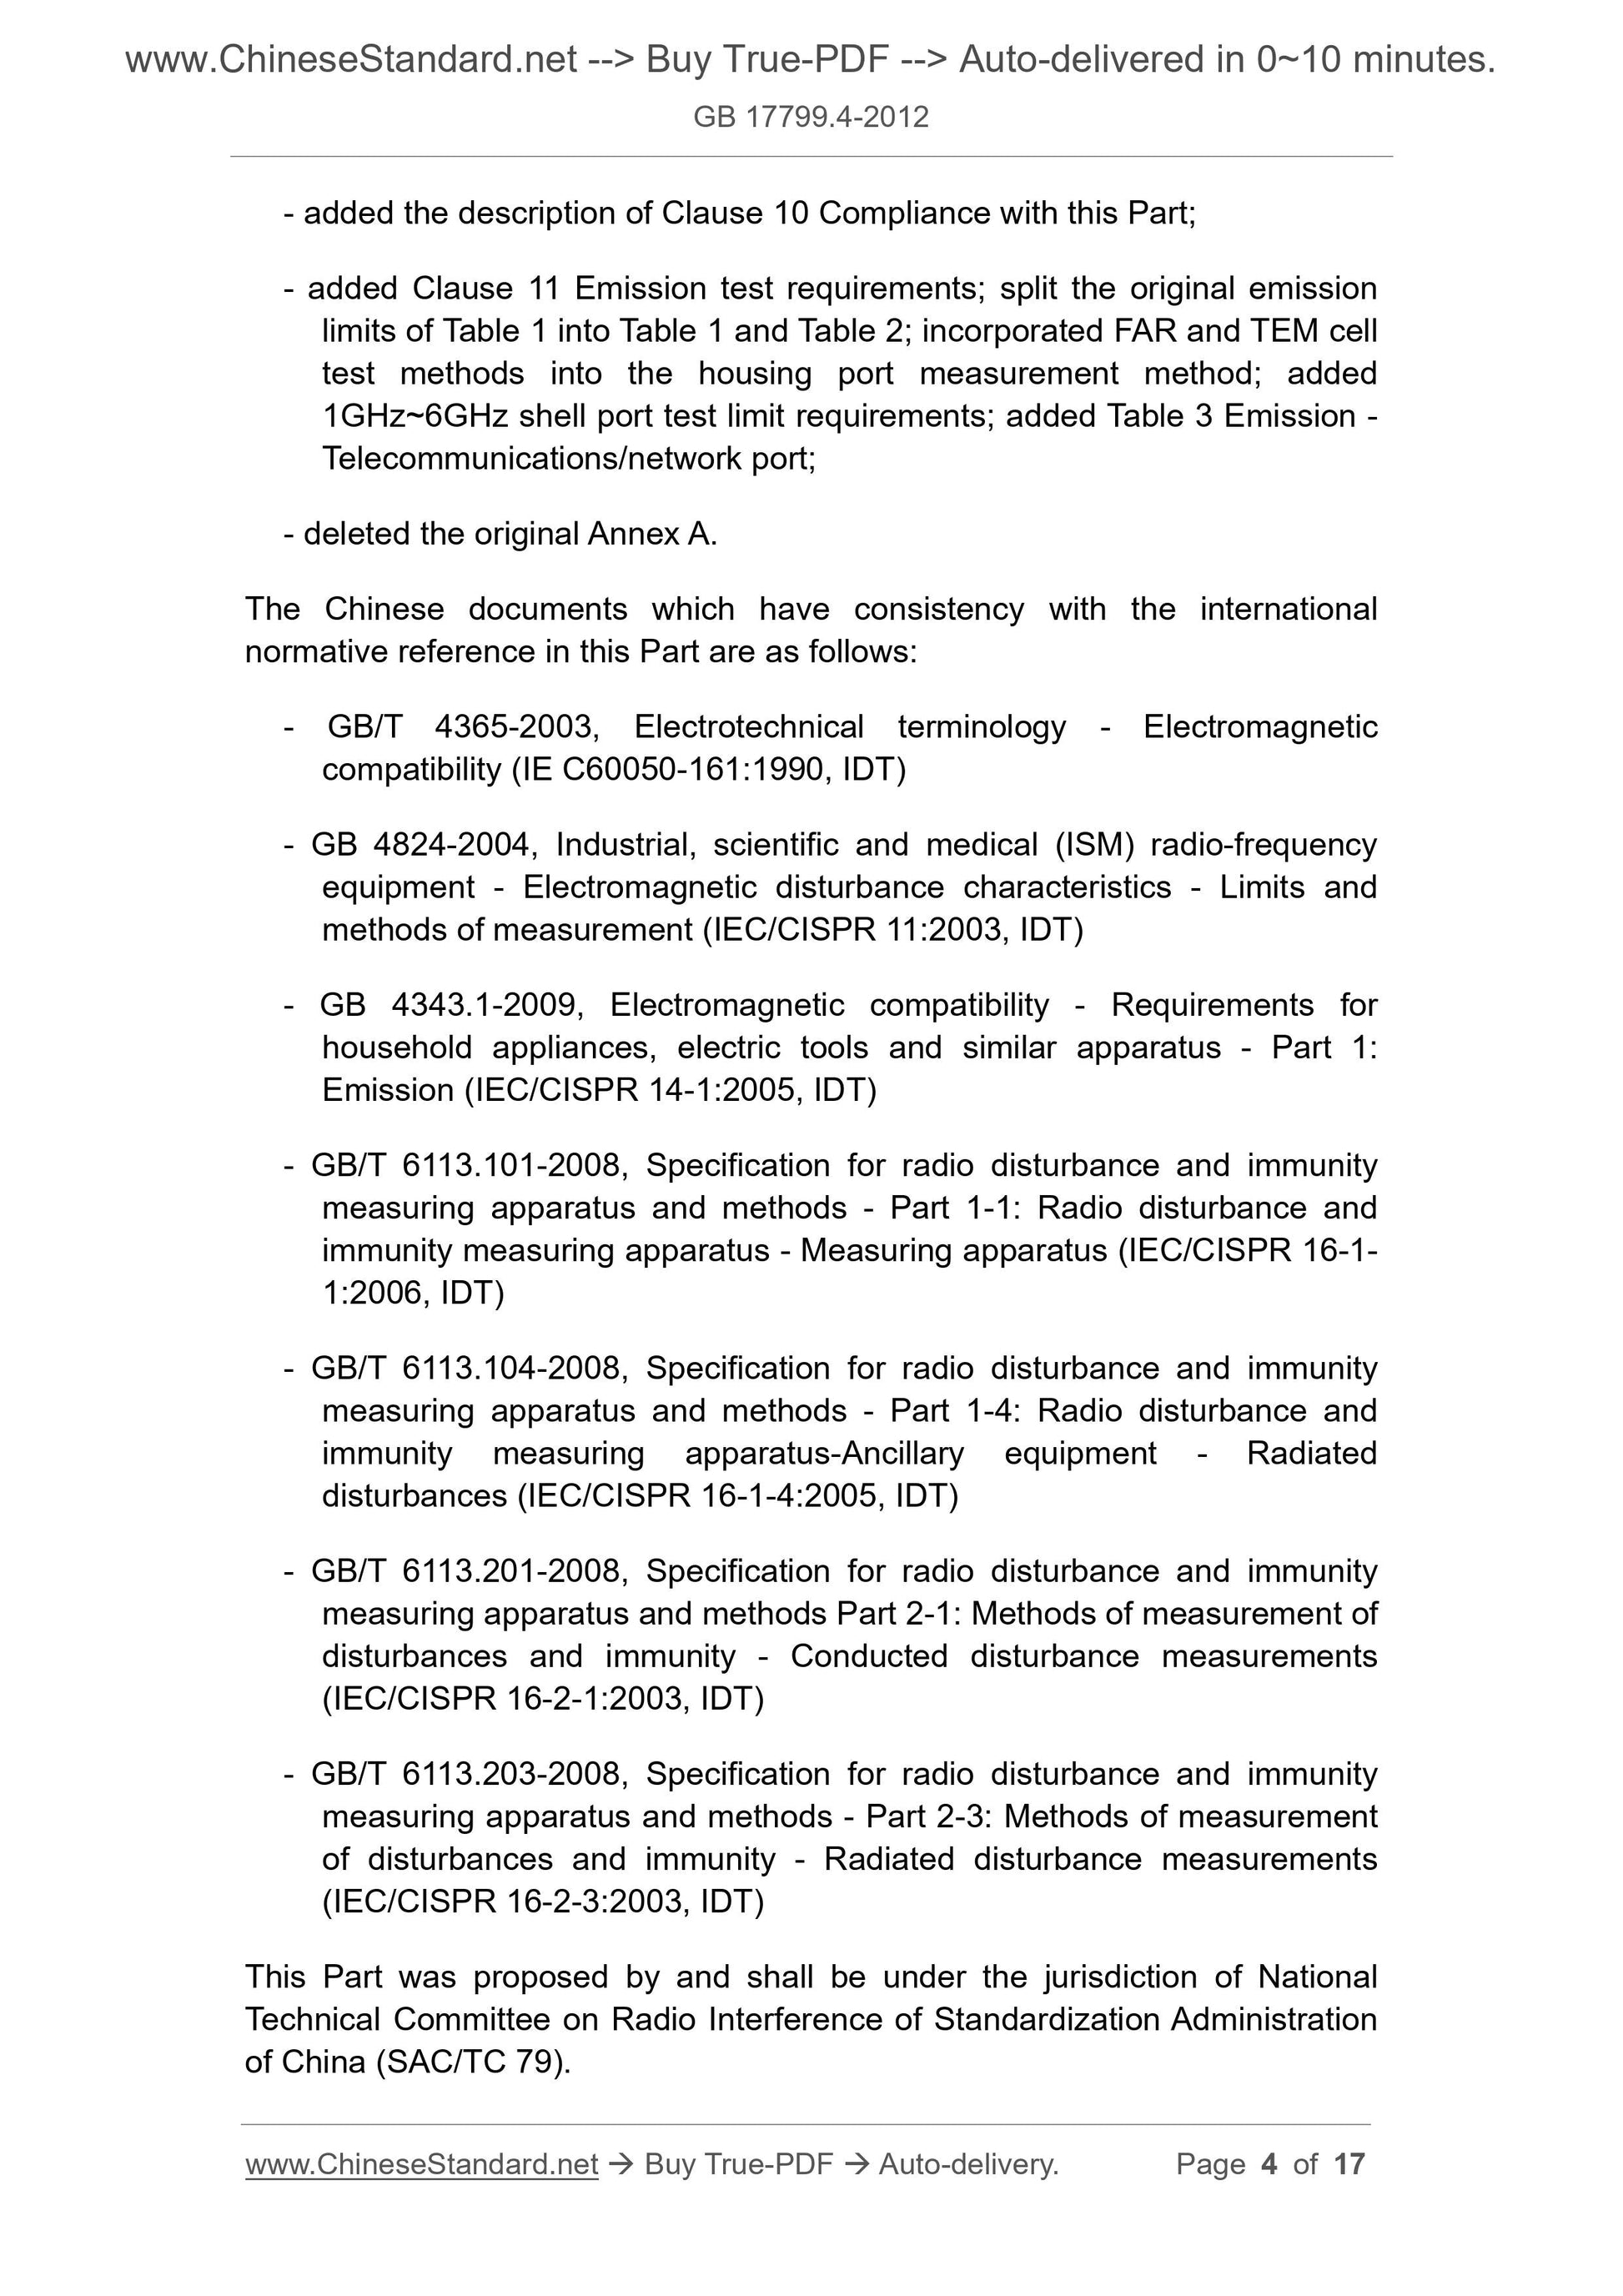 GB 17799.4-2012 Page 4